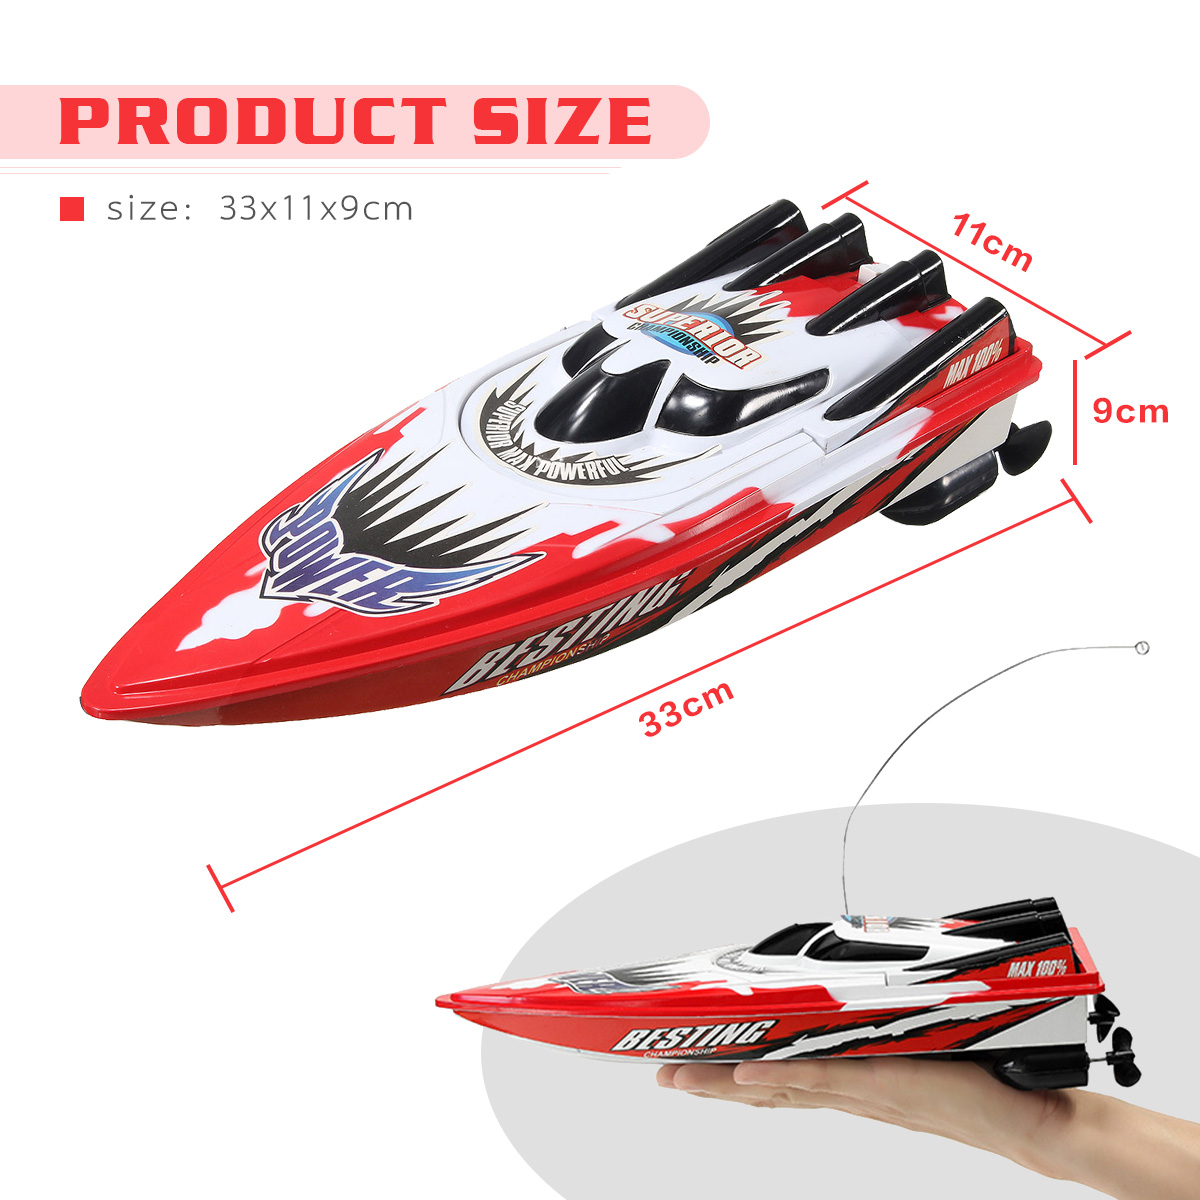 Red-Green-Plastic-Durable-Remote-Control-Twin-Motor-High-Speed-Racing-RC-Boat-Toy-1106287